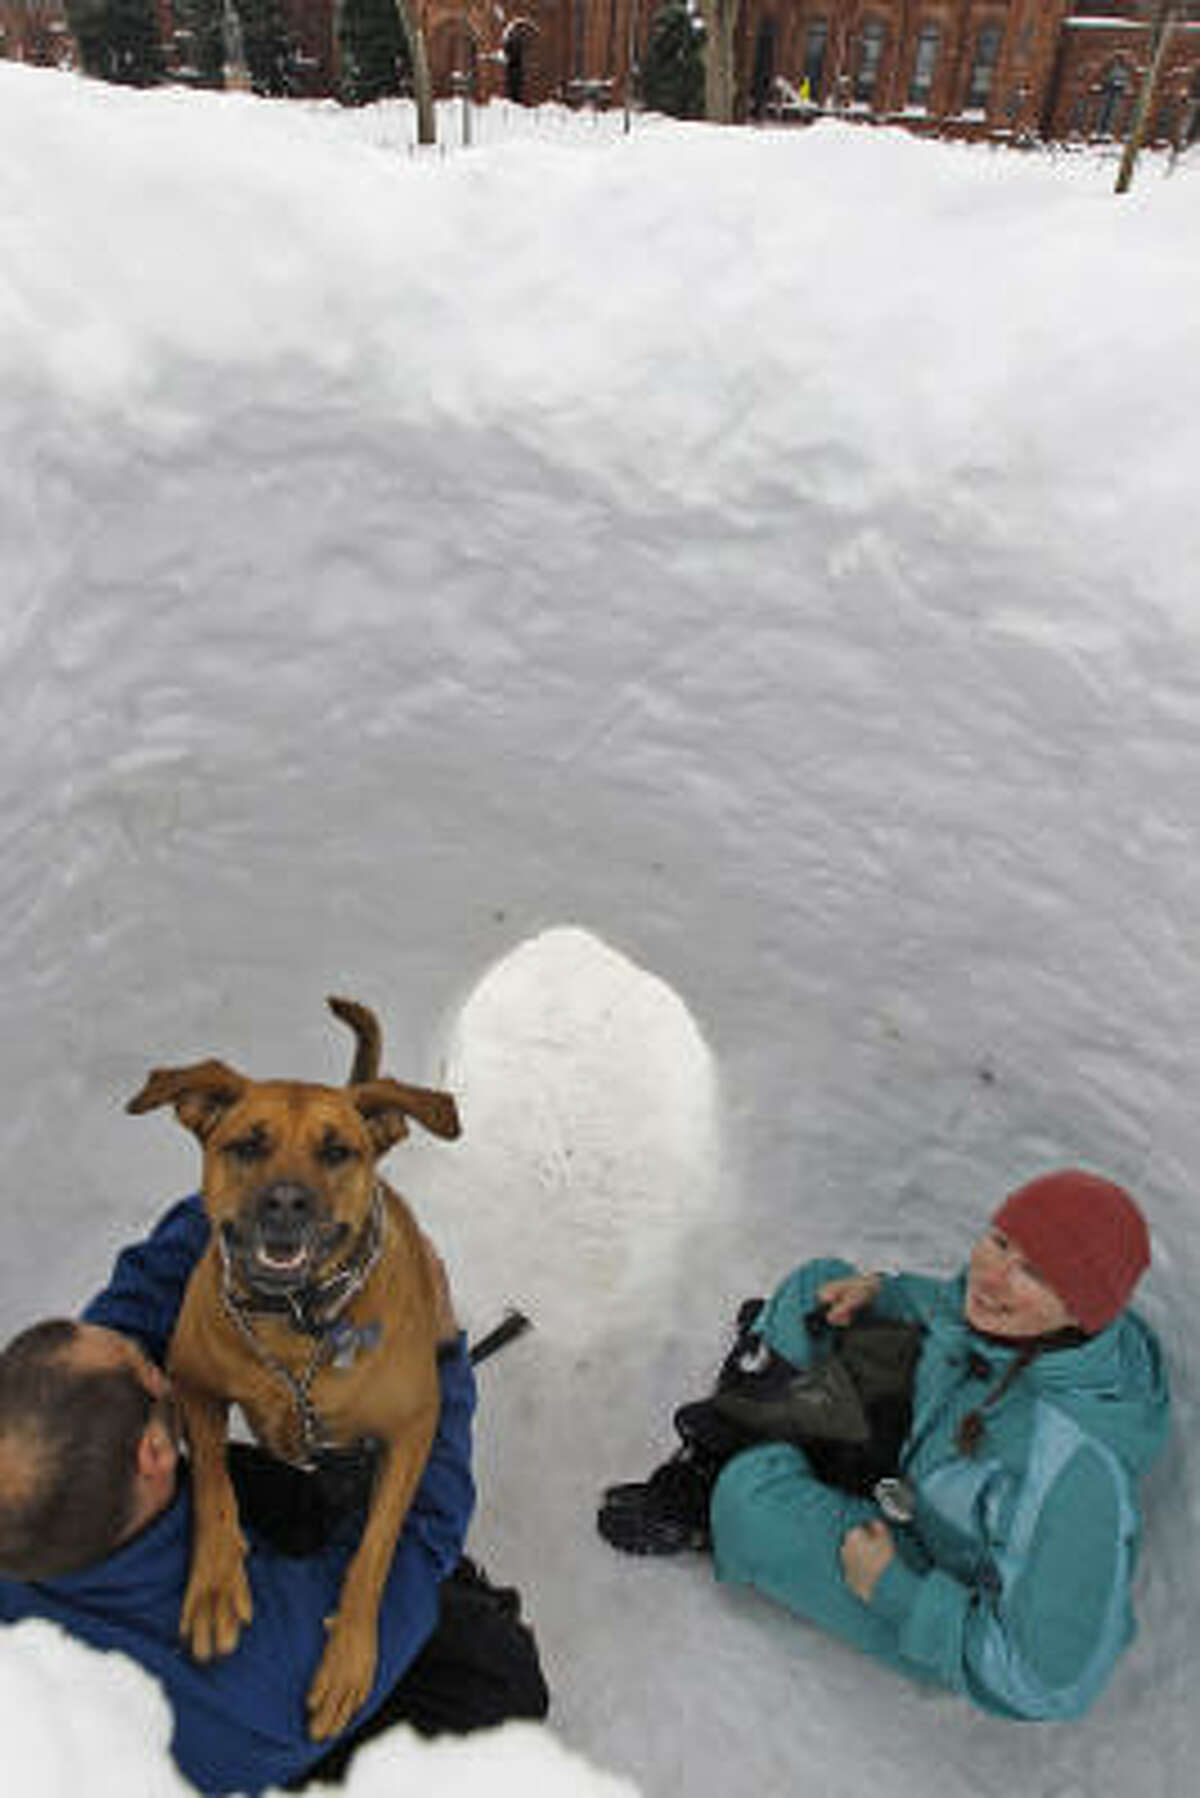 Stuart Naranch plays with his dog, Brunne, as his wife Sarah Naranch looks on inside a snow fort on the National Mall in Washington Feb. 9. Share your dog pics.